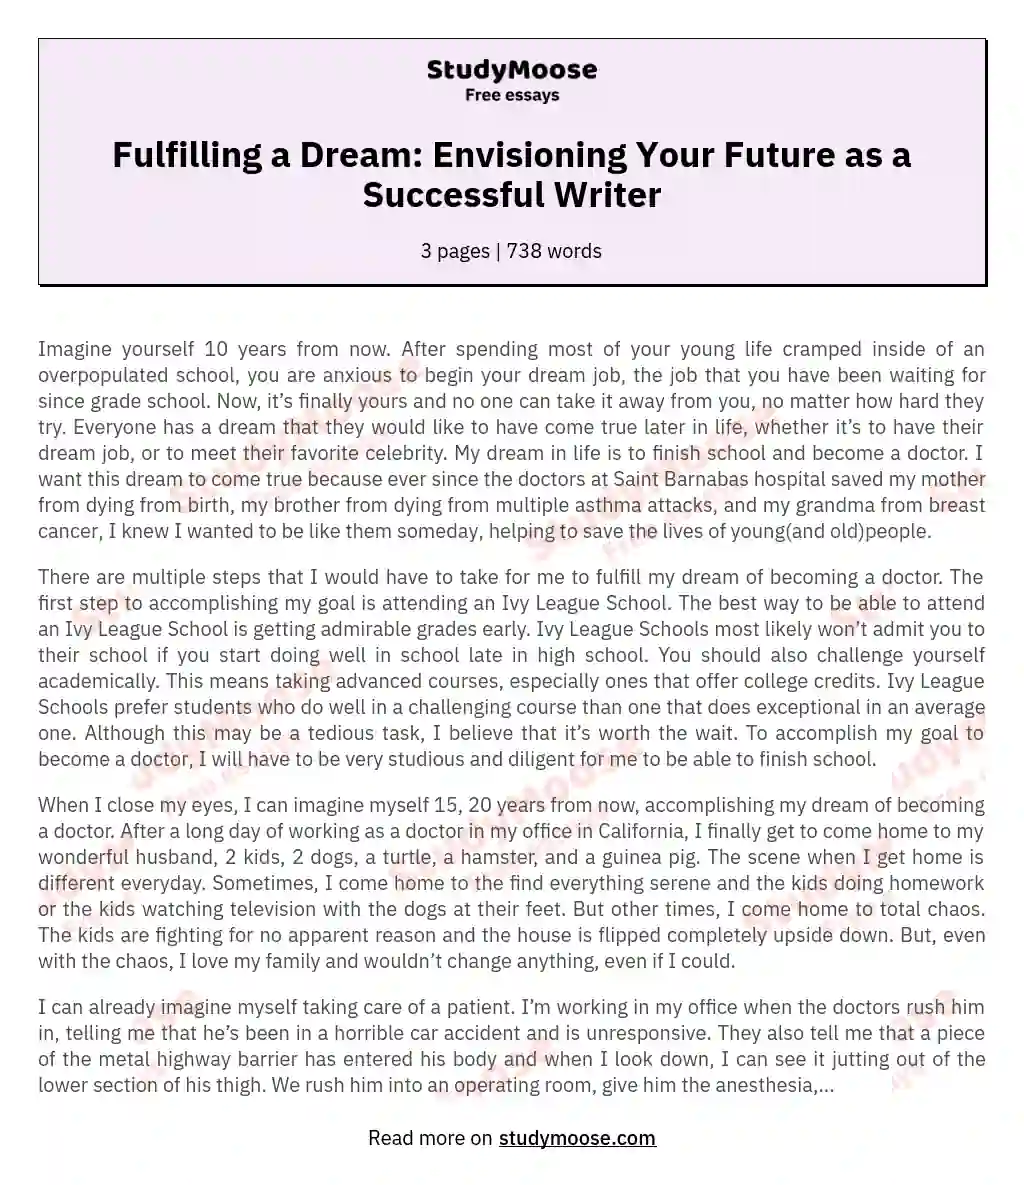 Fulfilling a Dream: Envisioning Your Future as a Successful Writer essay